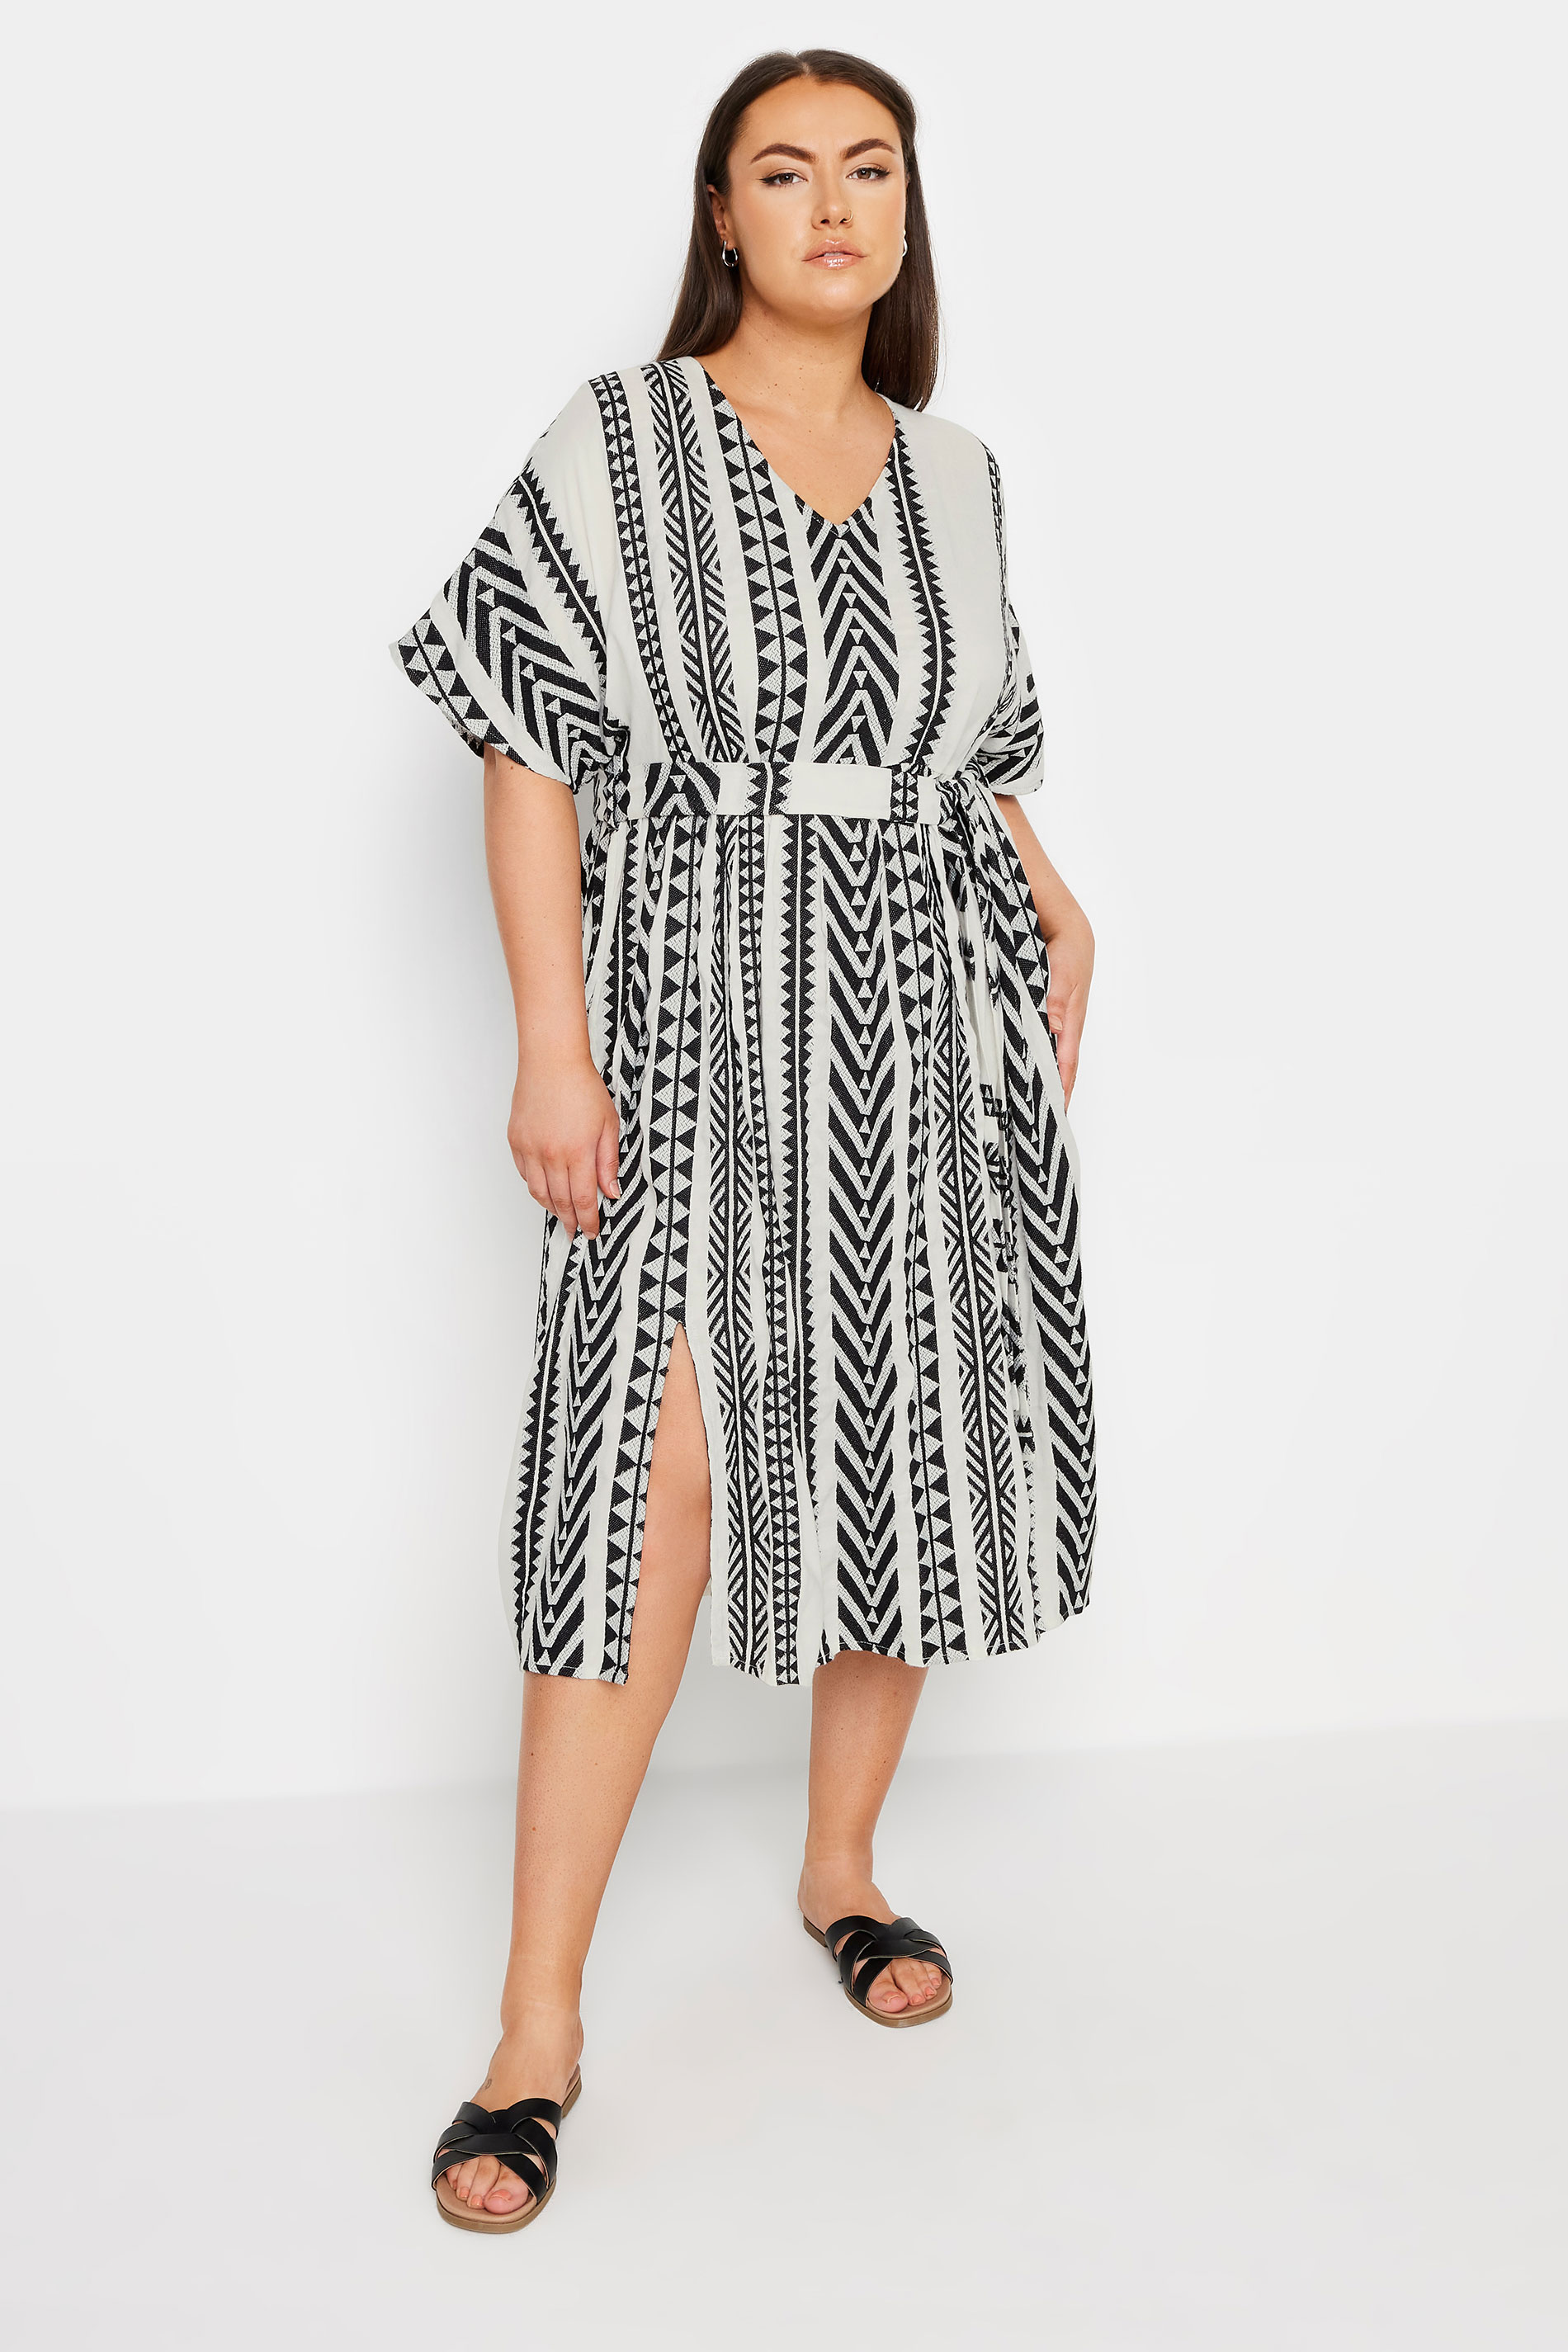 YOURS Plus Size Black & White Aztec Print Embroidered Maxi Dress | Yours Clothing  2